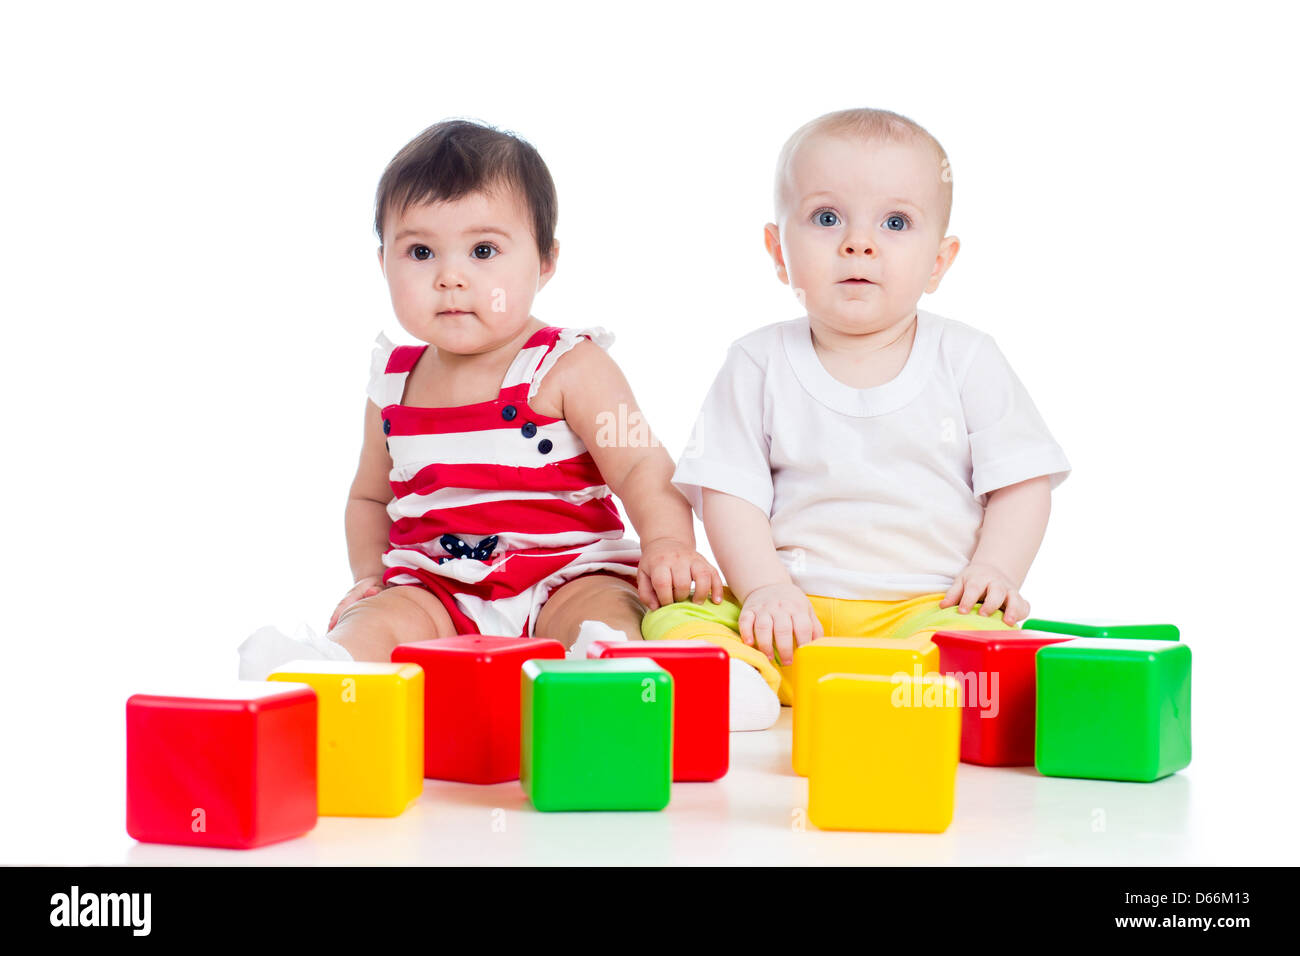 two babies or kids playing together with color toys Stock Photo